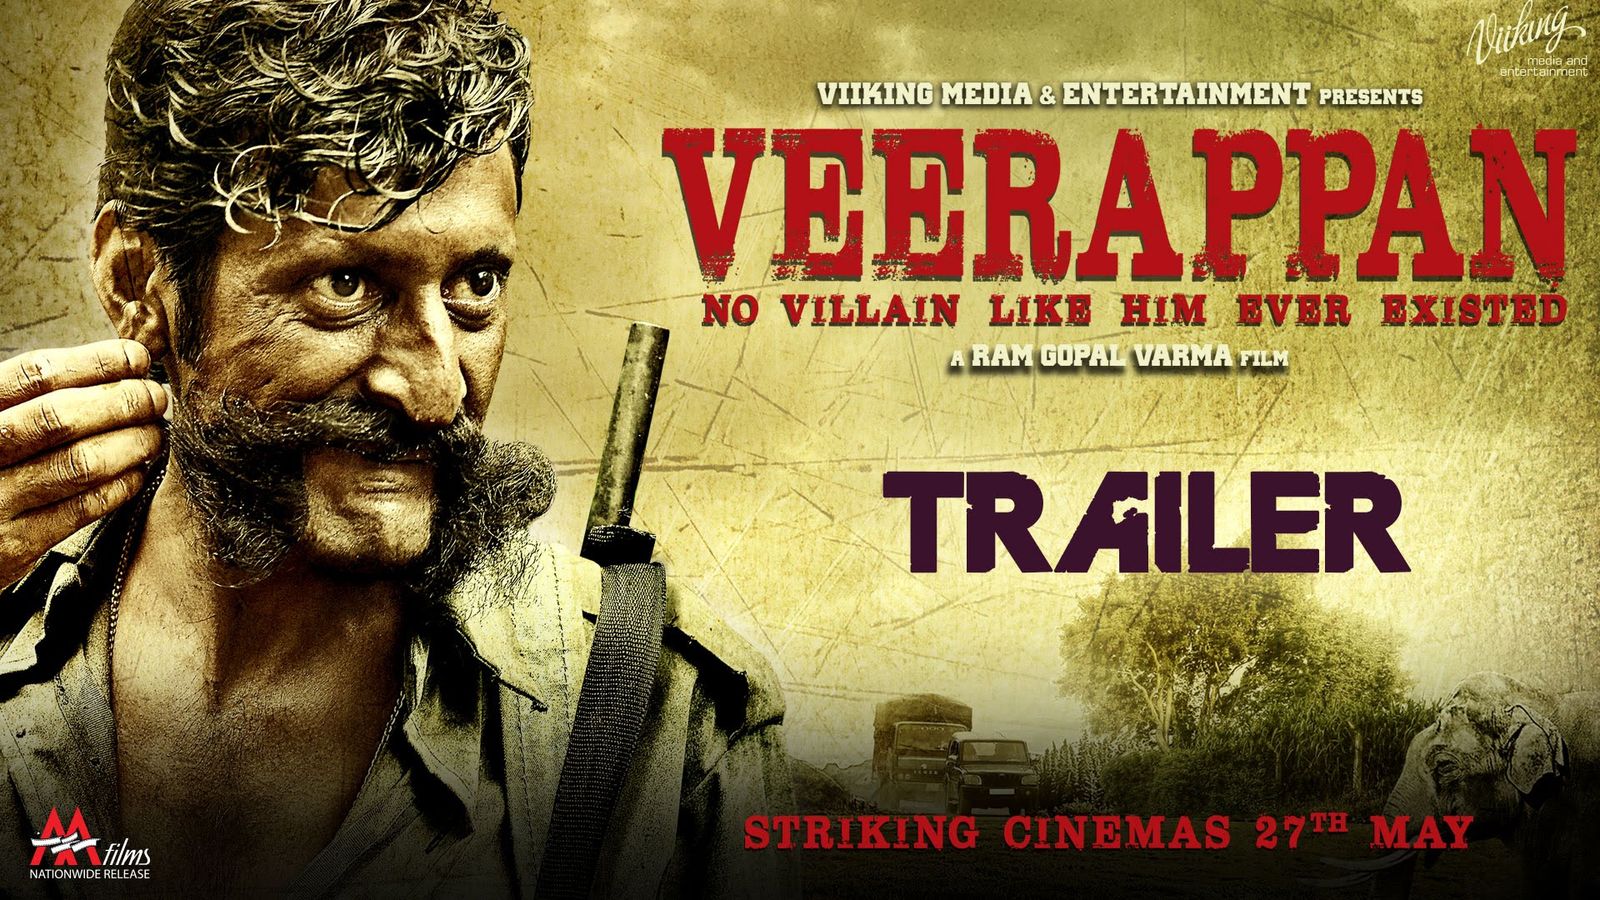 ‘Veerappan’ To Offer ‘Cinematic Ride That RGV Specialises In’,  Says Lisa Ray	